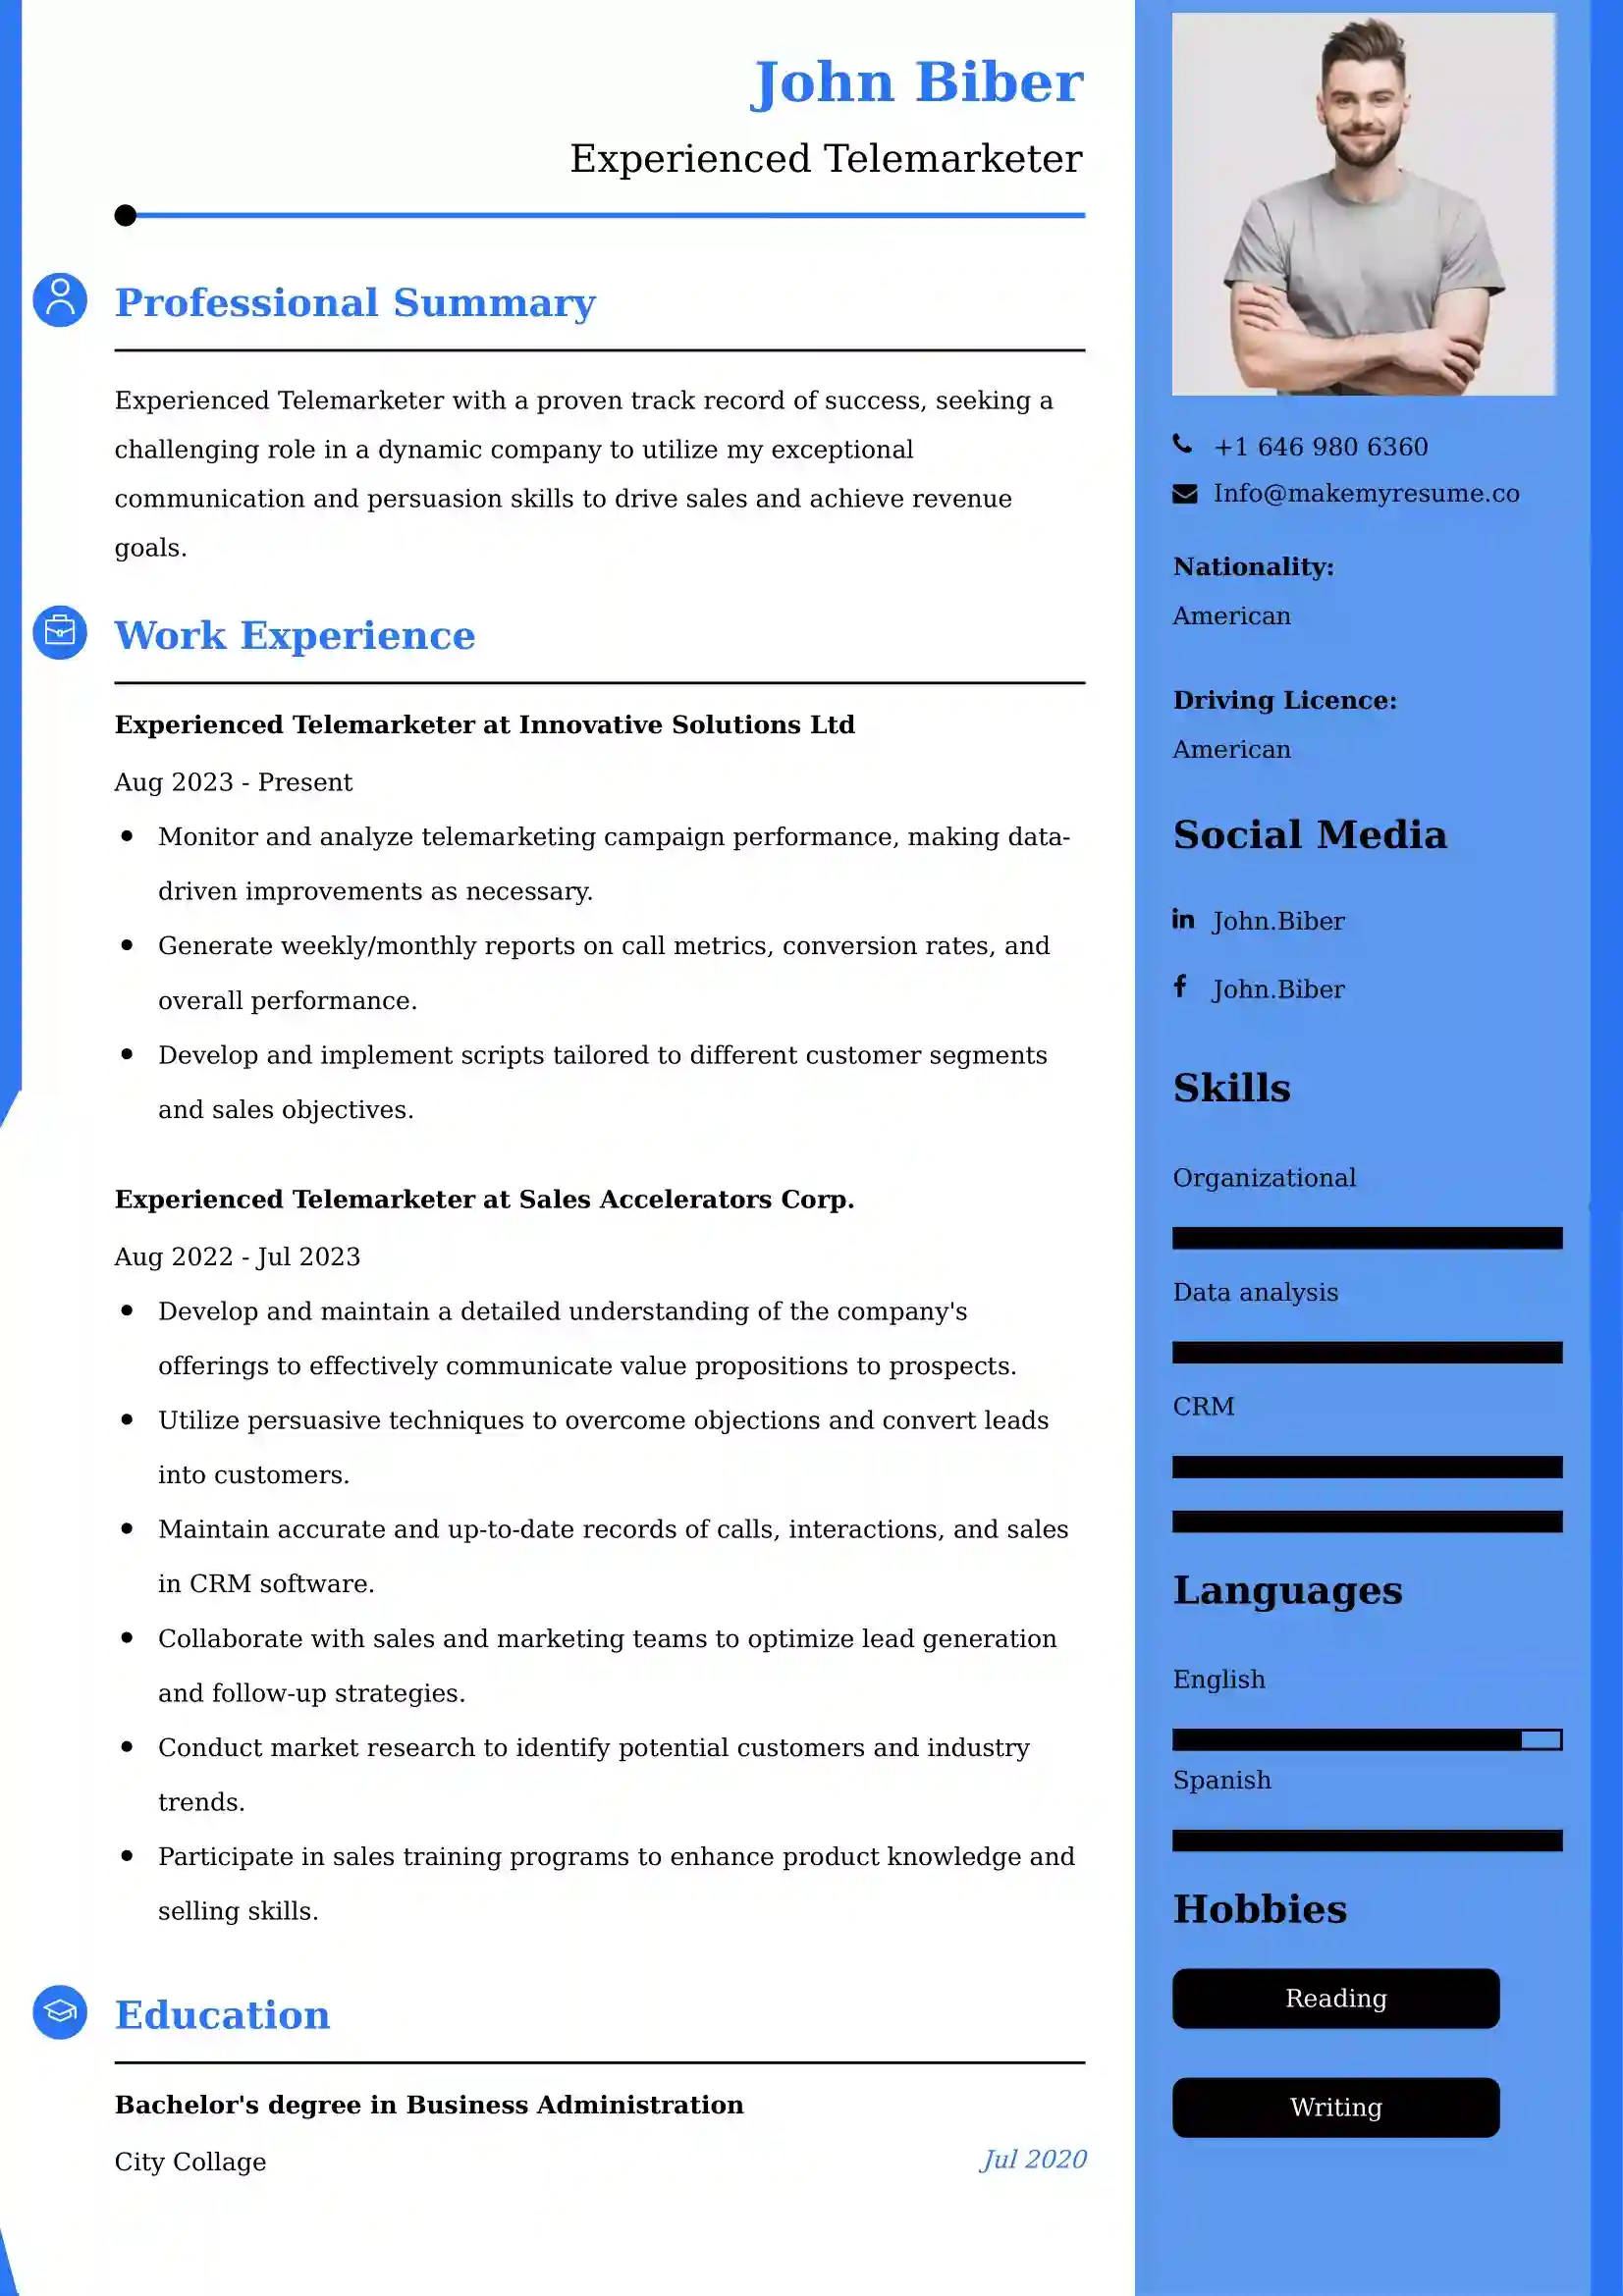 Experienced Telemarketer CV Examples - US Format